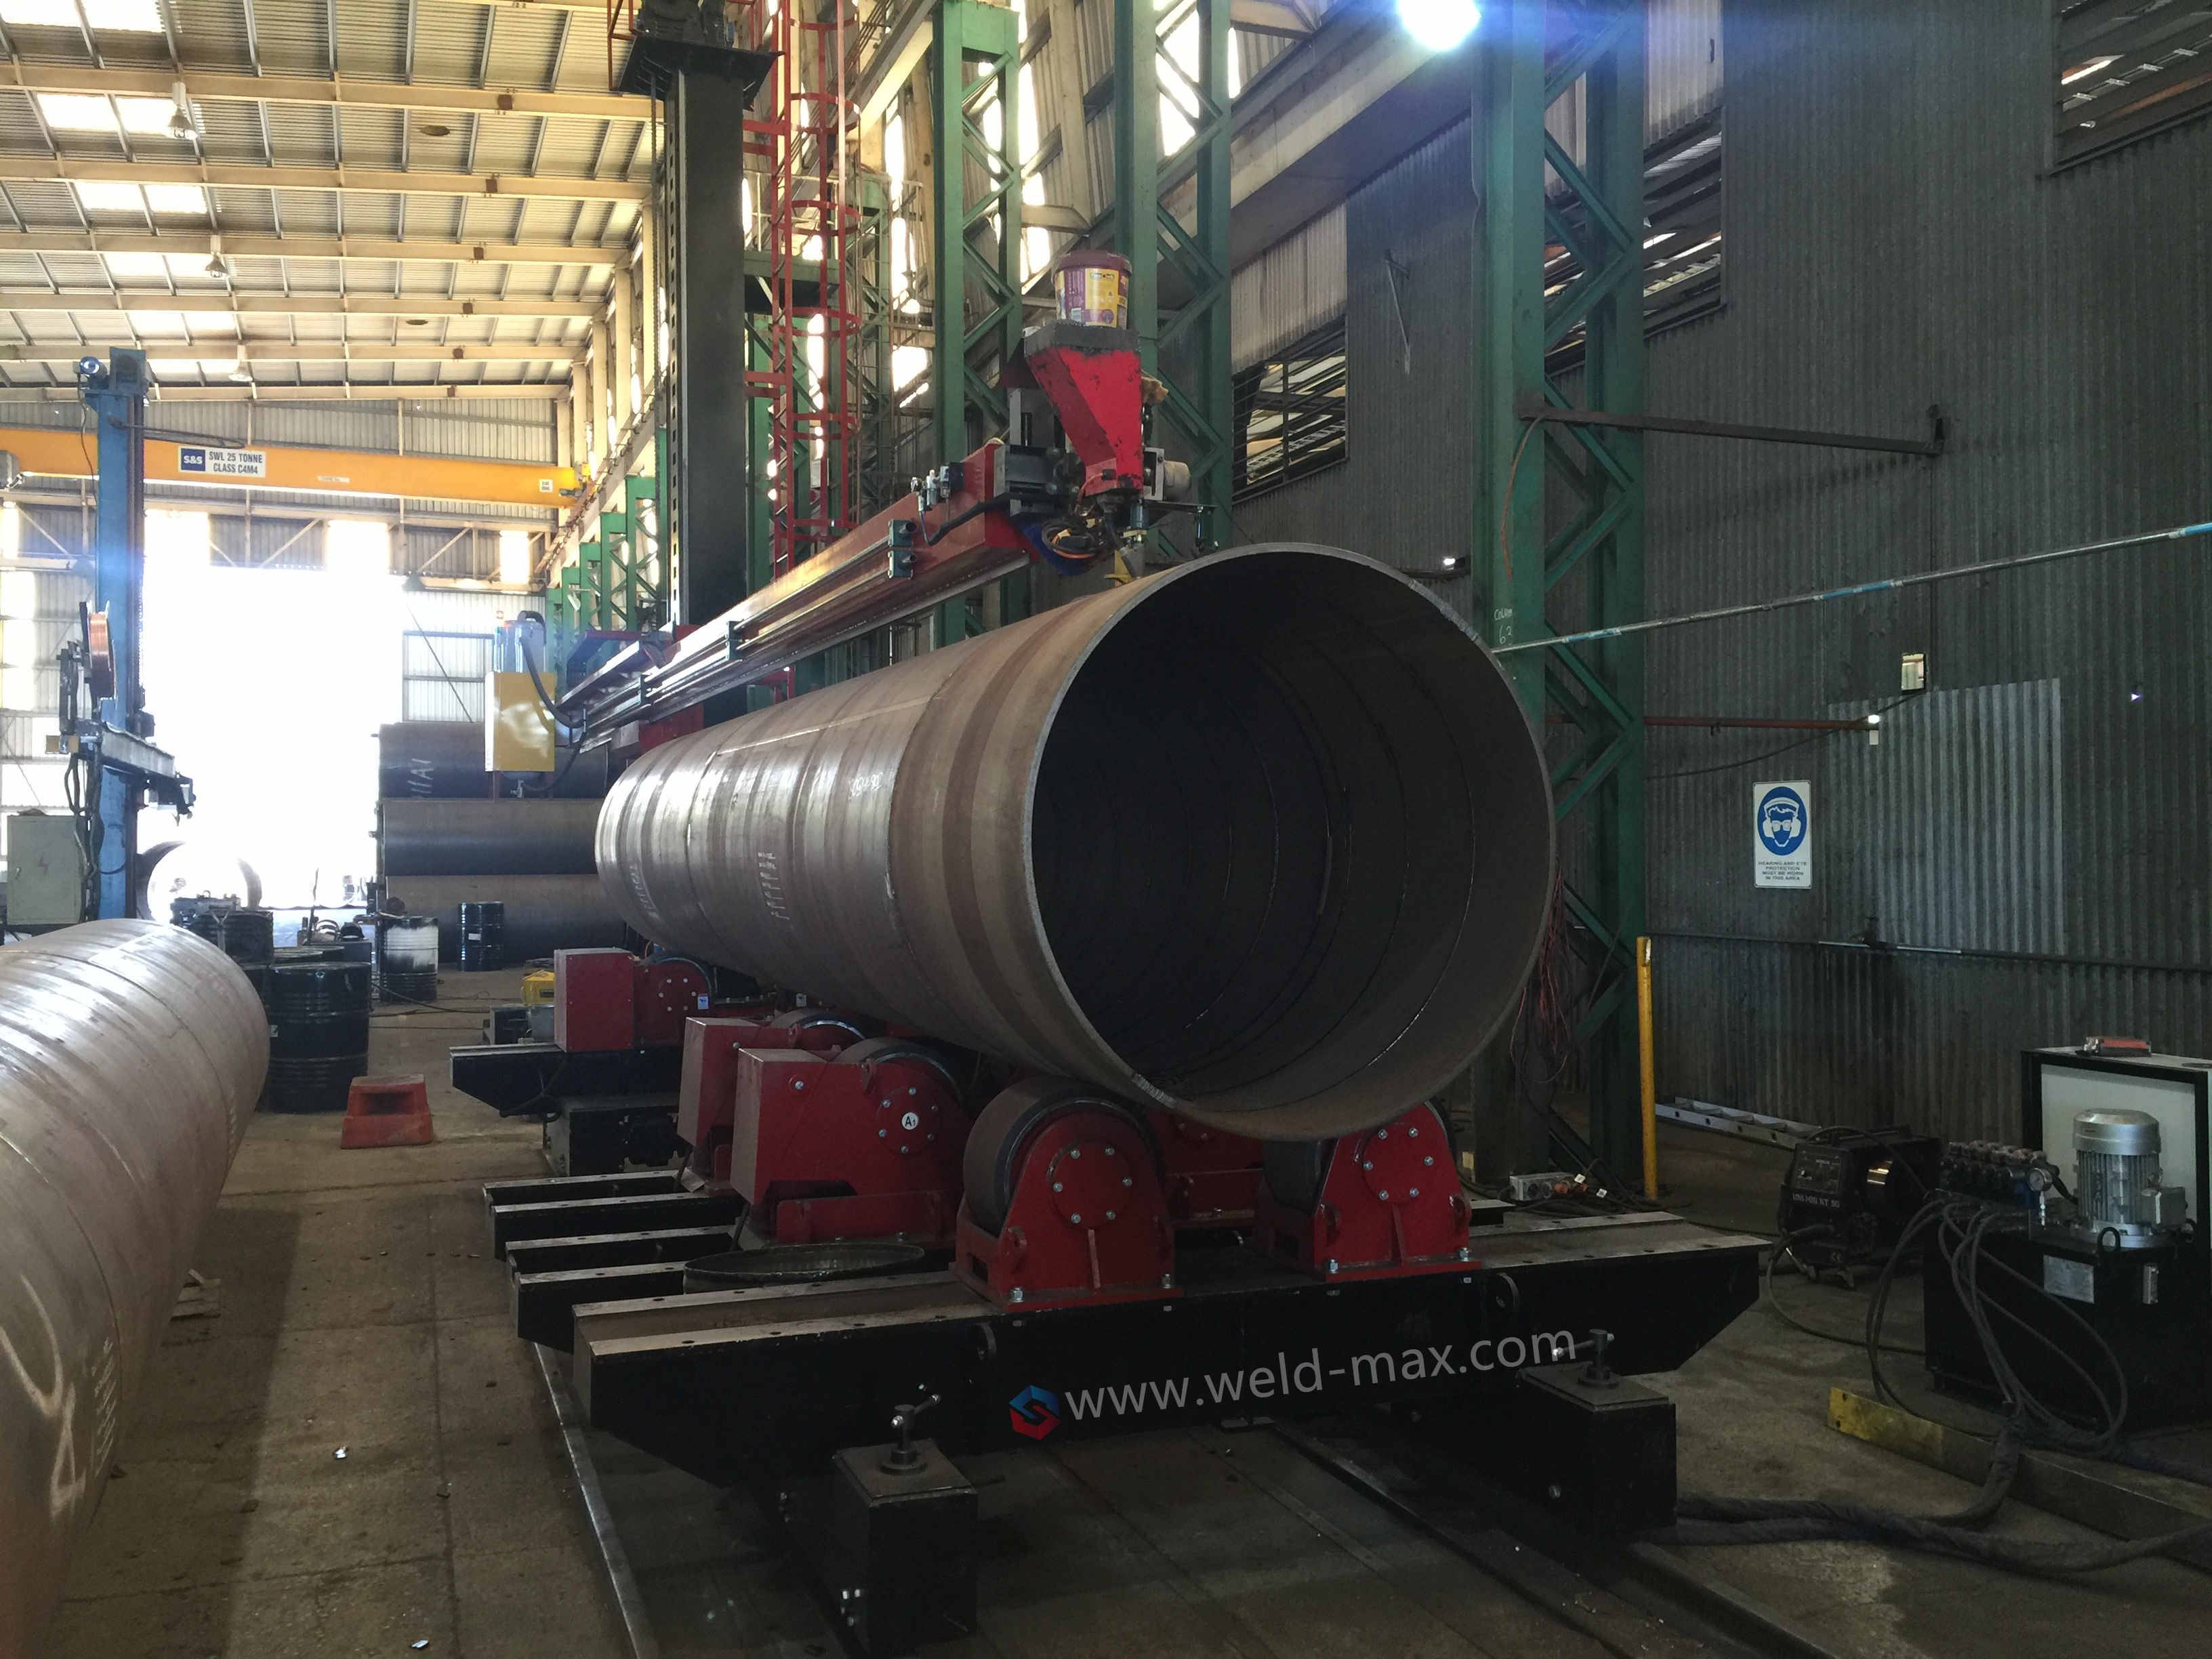 Newly ArrivalPipe Turning Rolls - 10T Red Conventional Fit-up Pipe Growing Line With 6-60m/h Wheel Velcocity PU Wheels – Sanlian